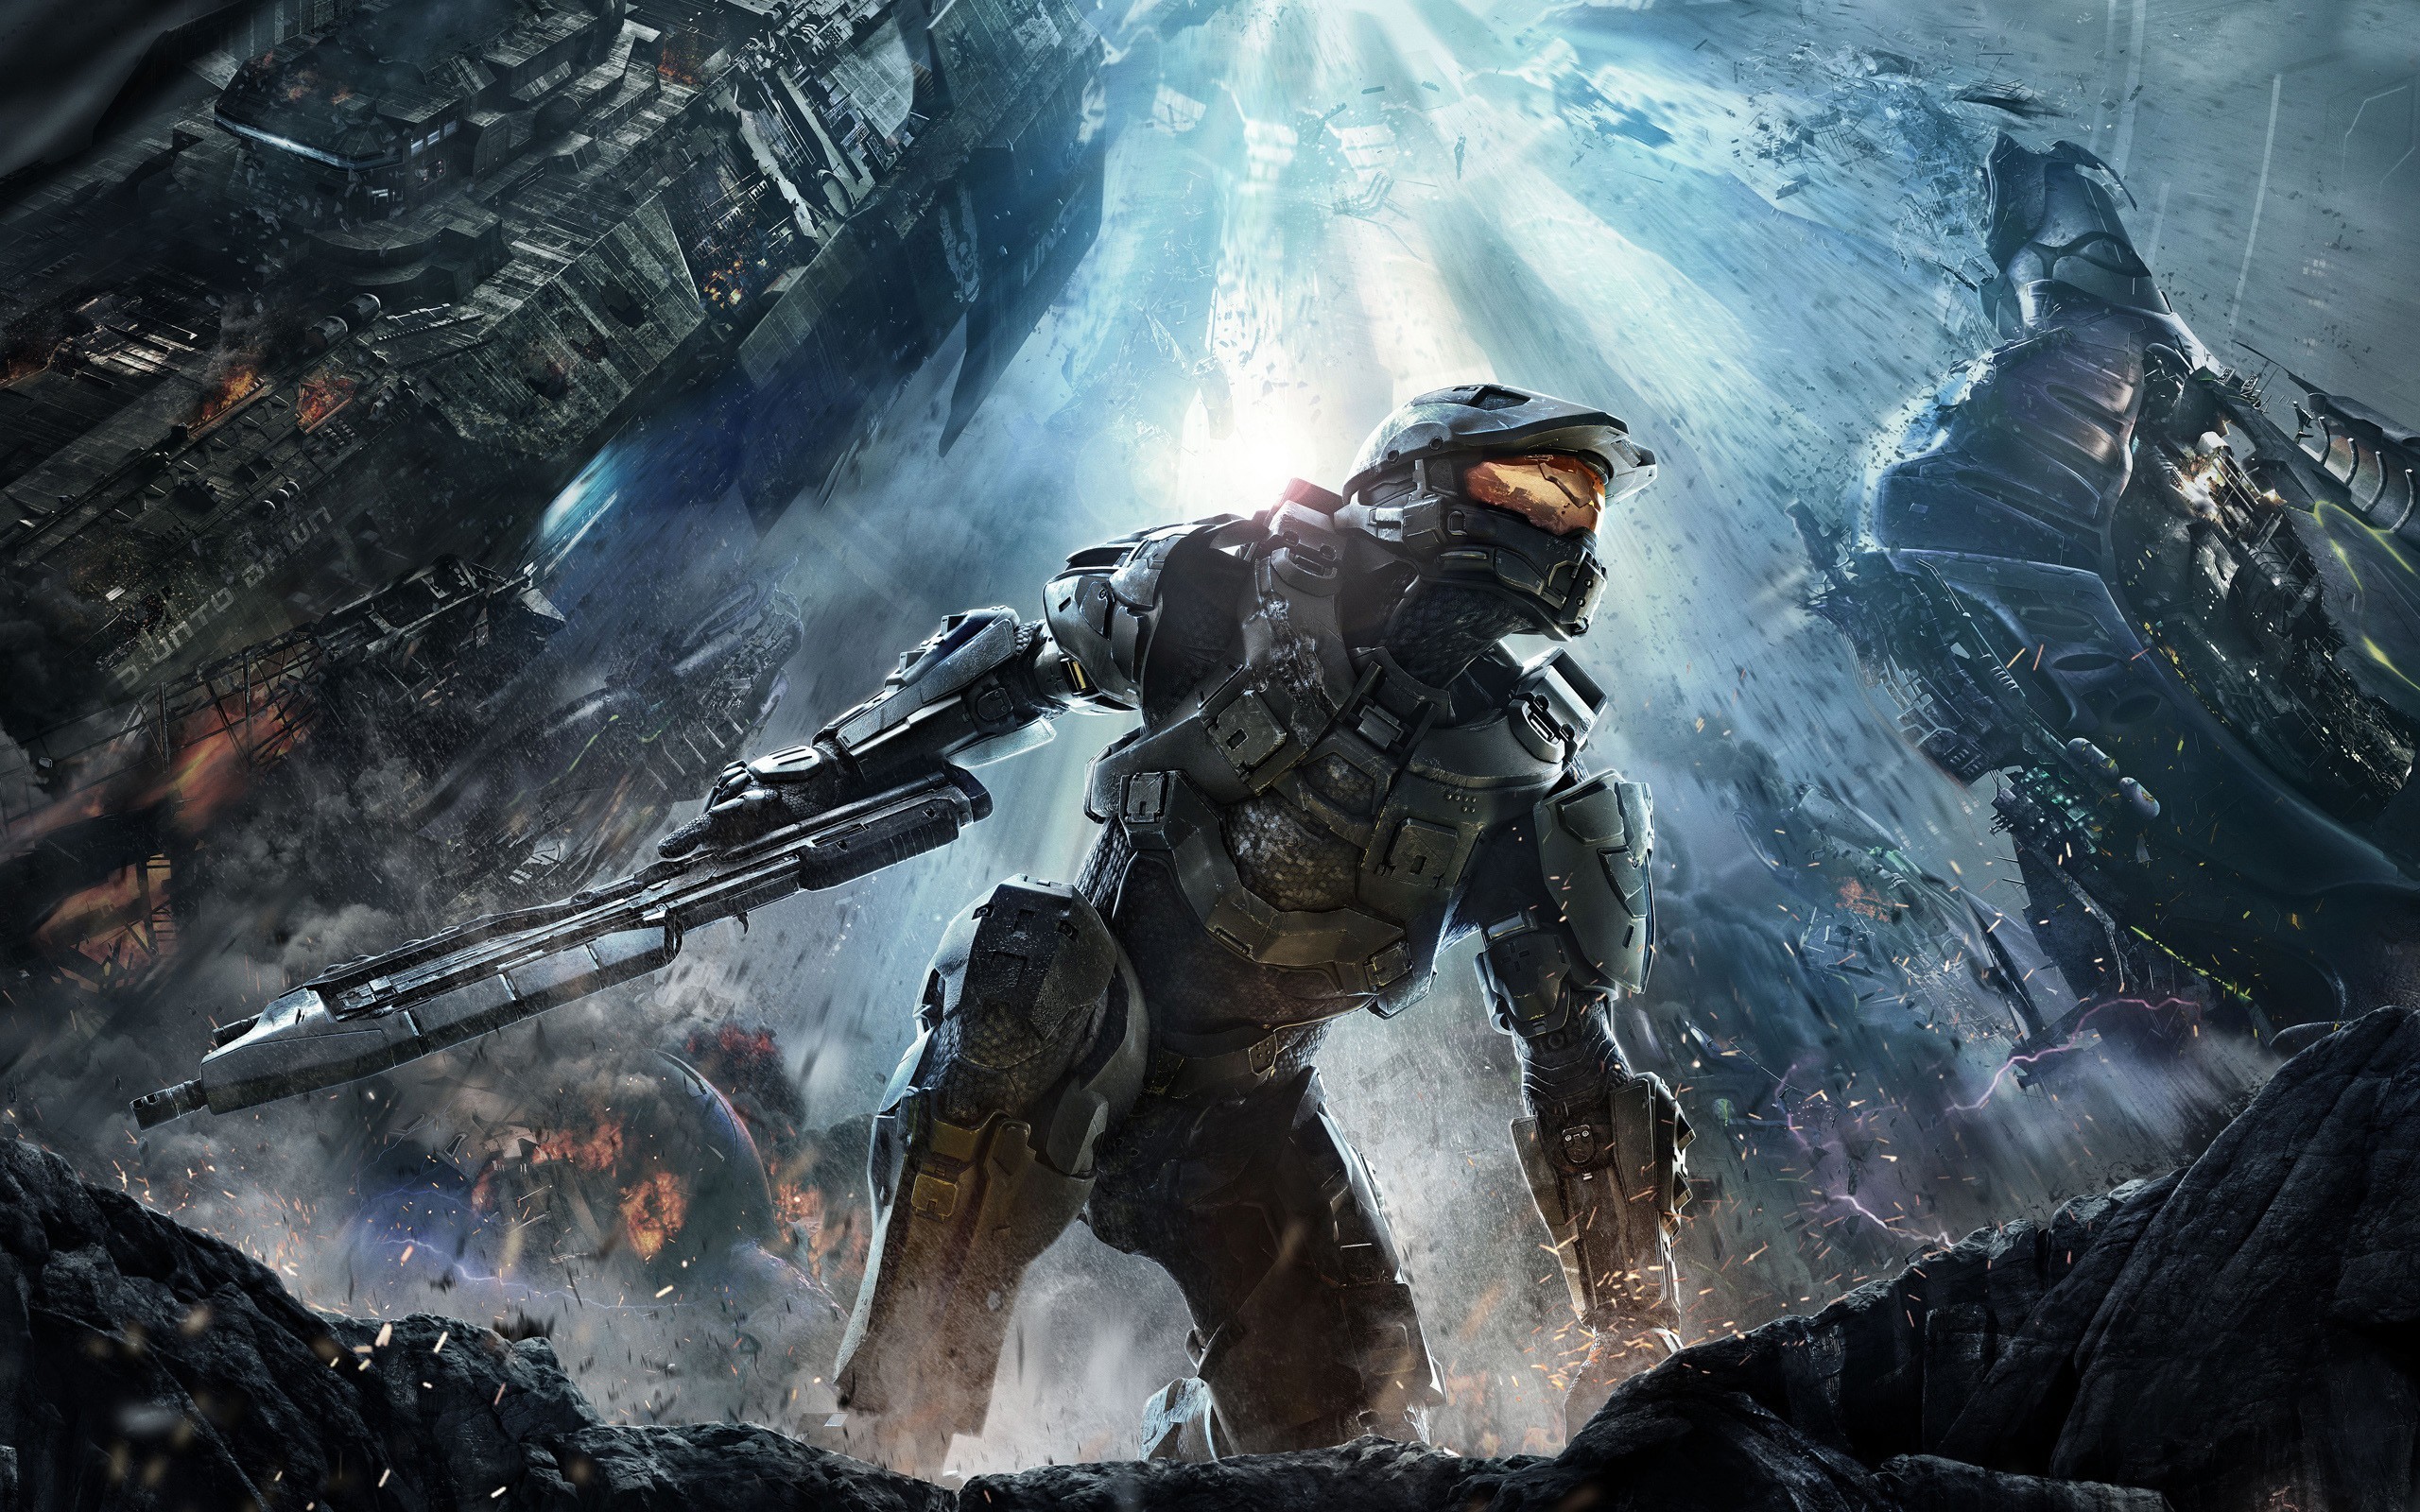 2560x1600 Halo-5-Master-Chief-Wide-Wallpapers.jpg (2560Ã1600) | Wallpaper Desktop |  Pinterest | Wallpaper desktop and Wallpaper